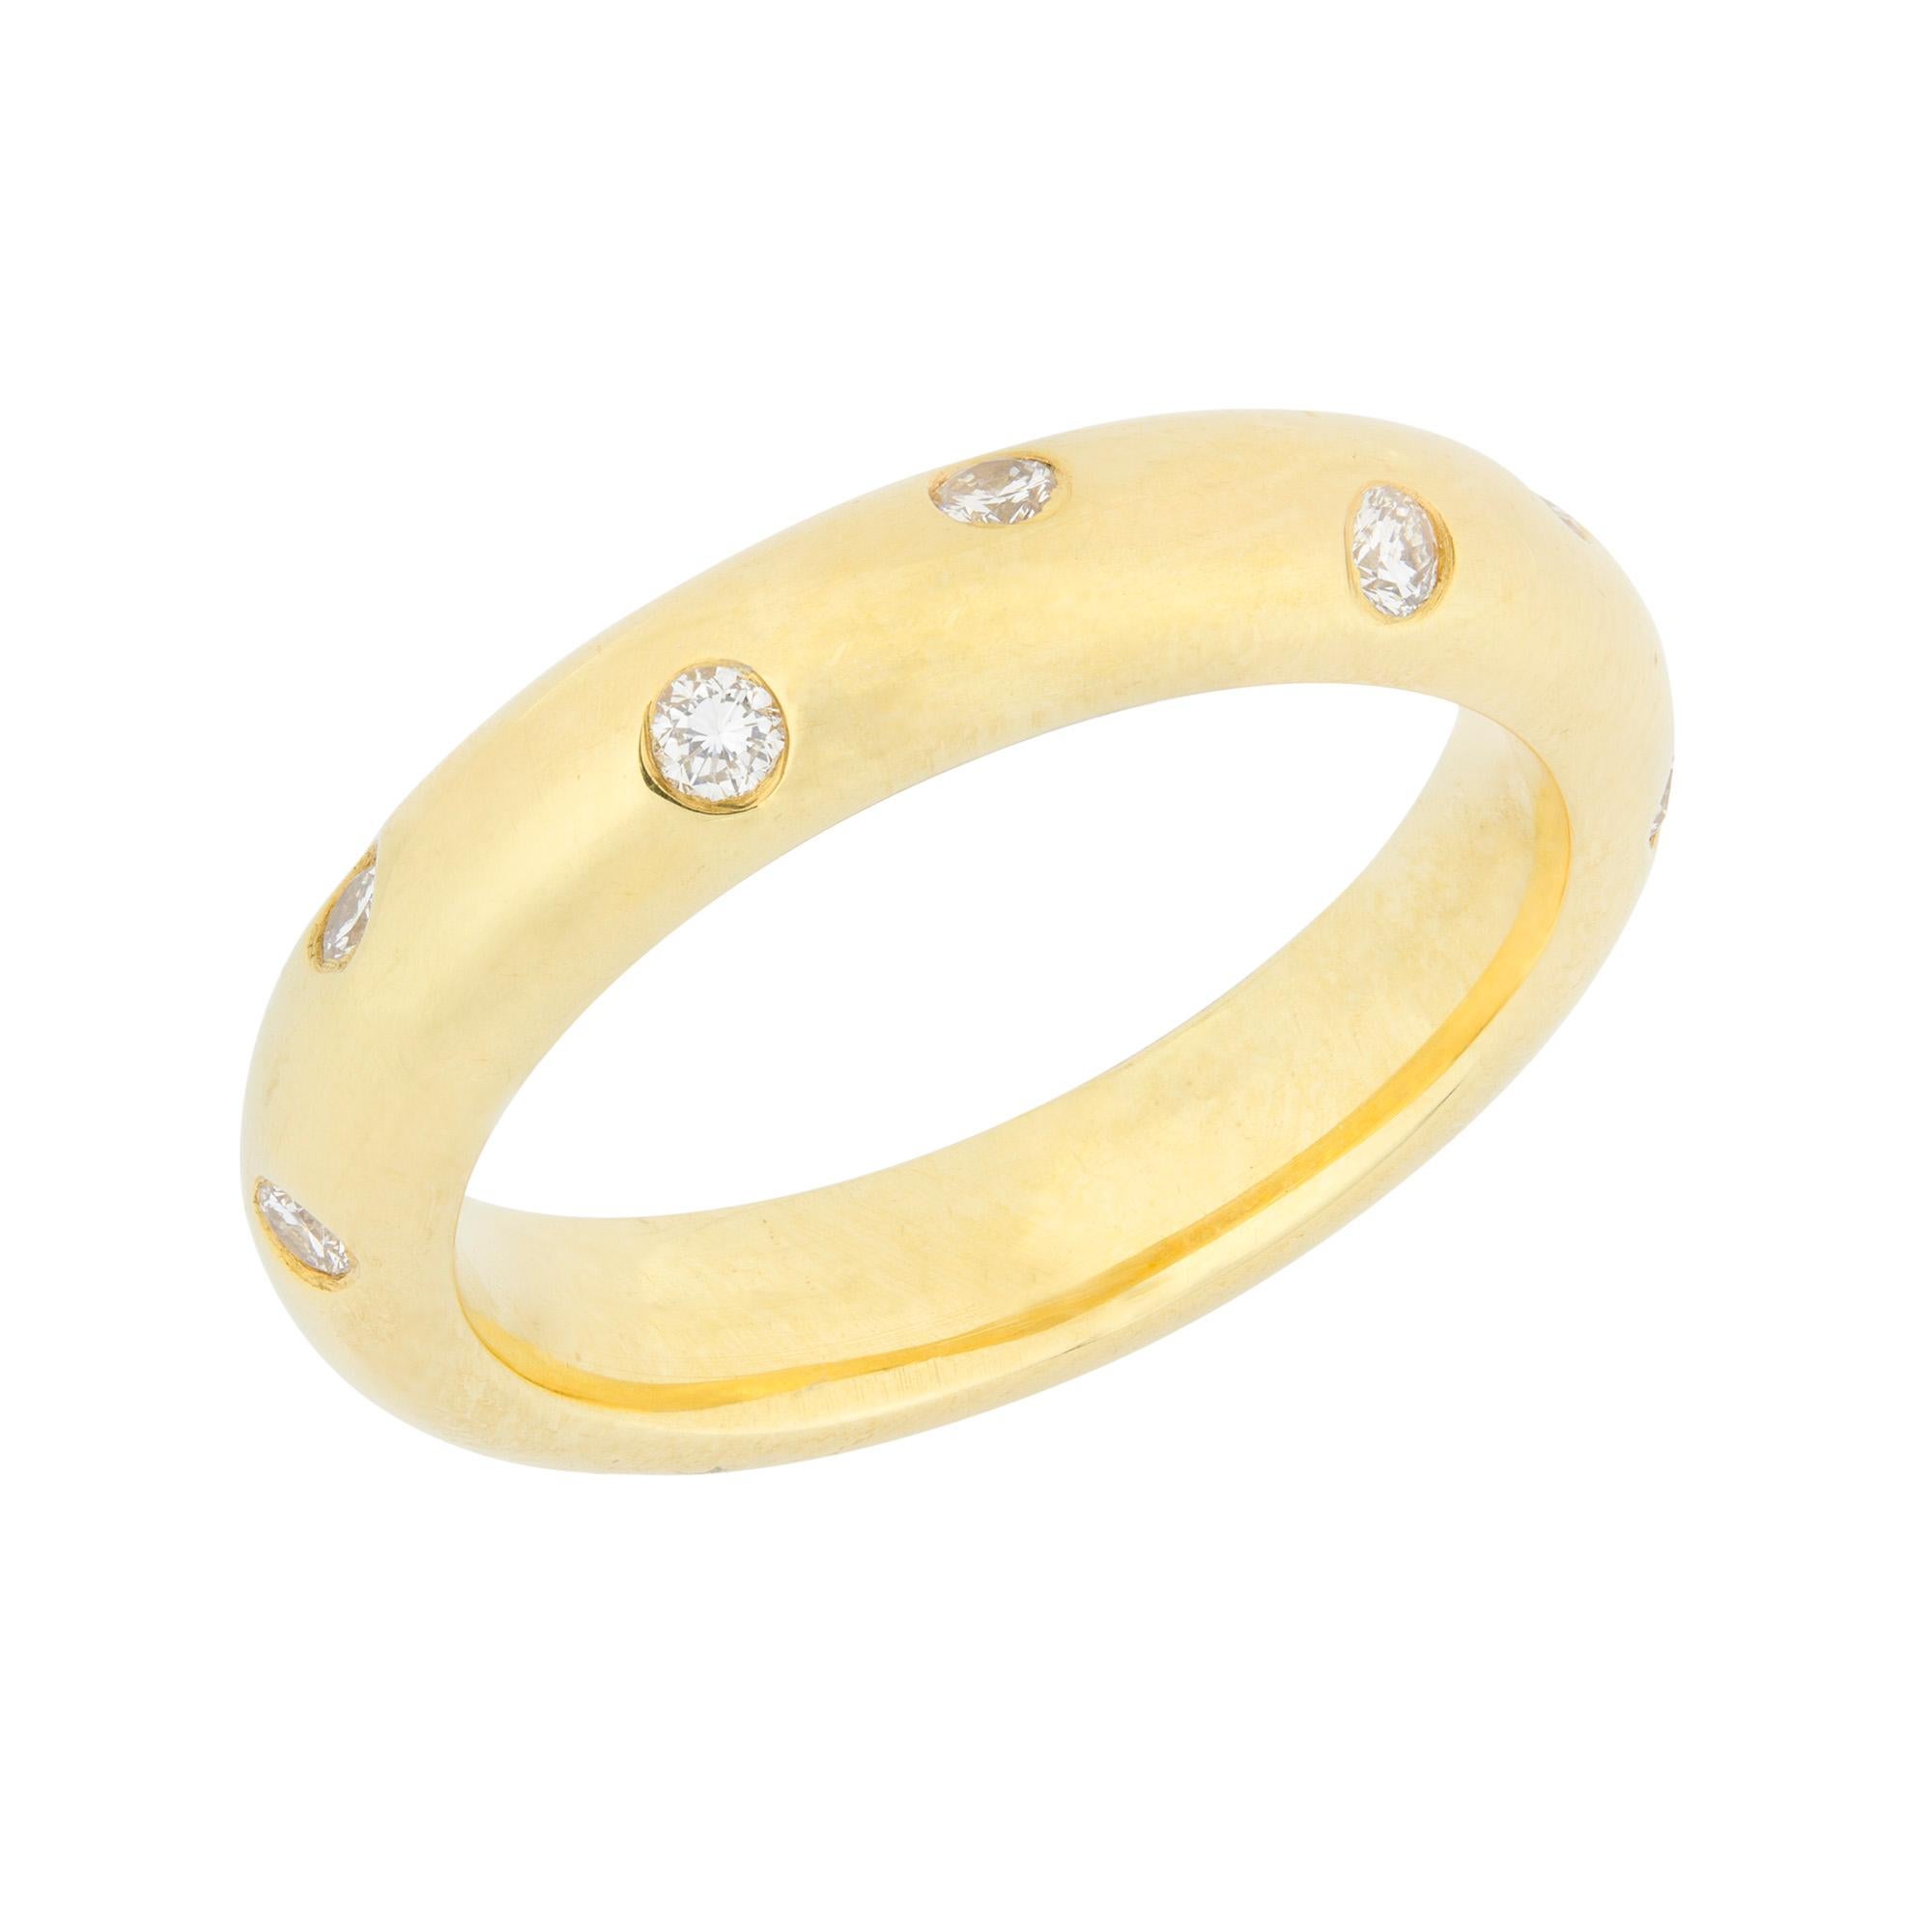 A diamond-set wedding band, the D-section yellow gold band measuring 4.1mm in width, set with twelve round brilliant-cut diamonds, hallmarked 18 carat gold, London 2001, bearing the LW&G sponsor mark, finger size M, gross weight 7.9 grams.

A